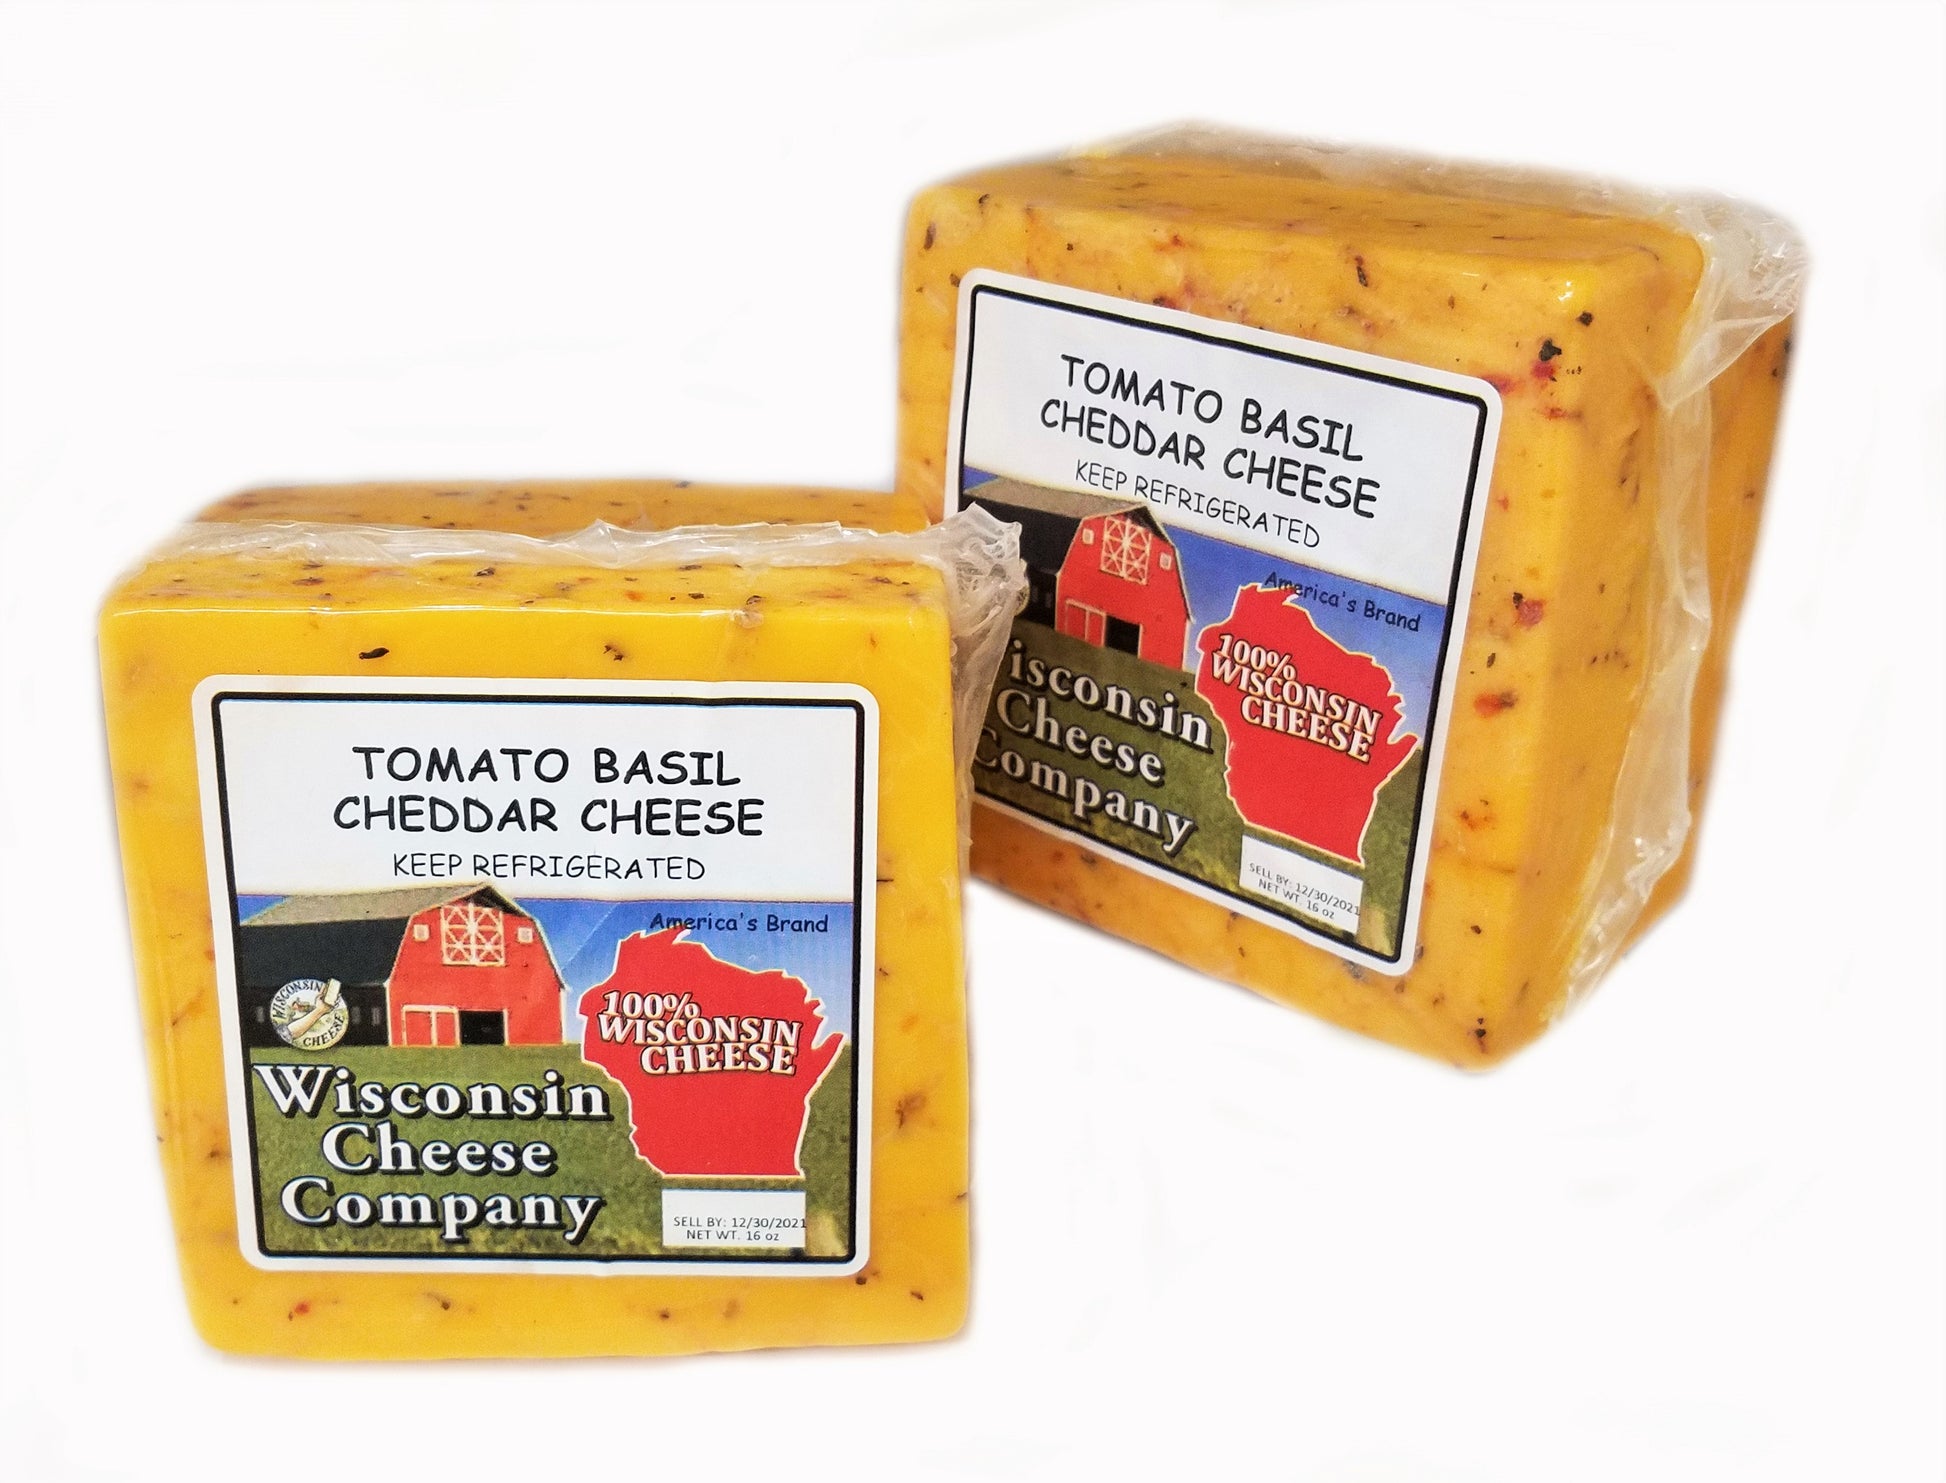 Two blocks of Tomato Basil Cheddar Cheese